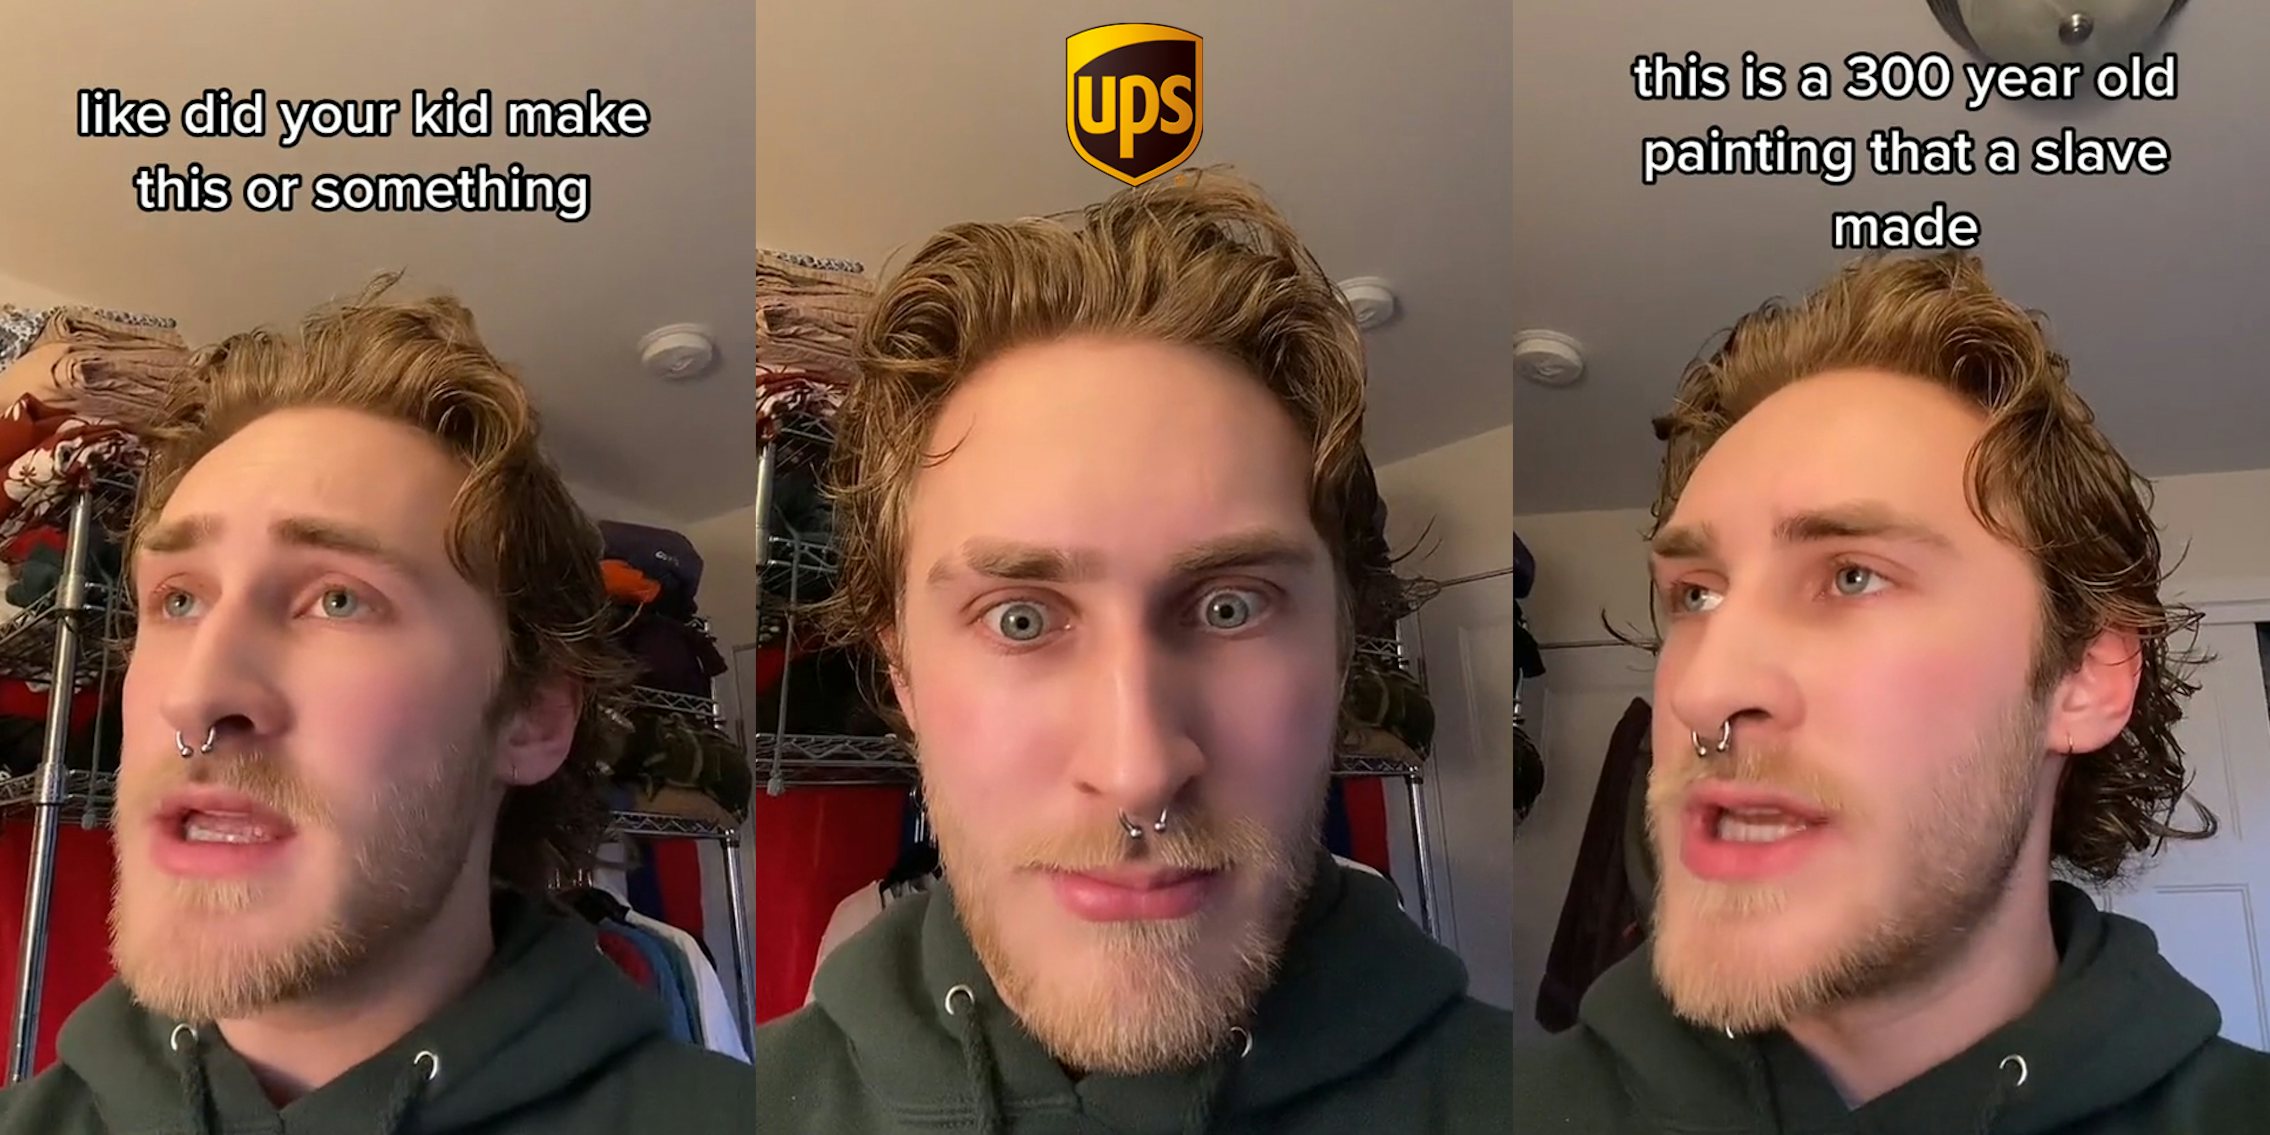 former UPS worker speaking caption 'like did your kid make this or something' (l) former UPS worker with shocked expression and UPS logo above head (c) former UPS worker speaking caption 'this is a 300 year old painting that a slave made' (r)